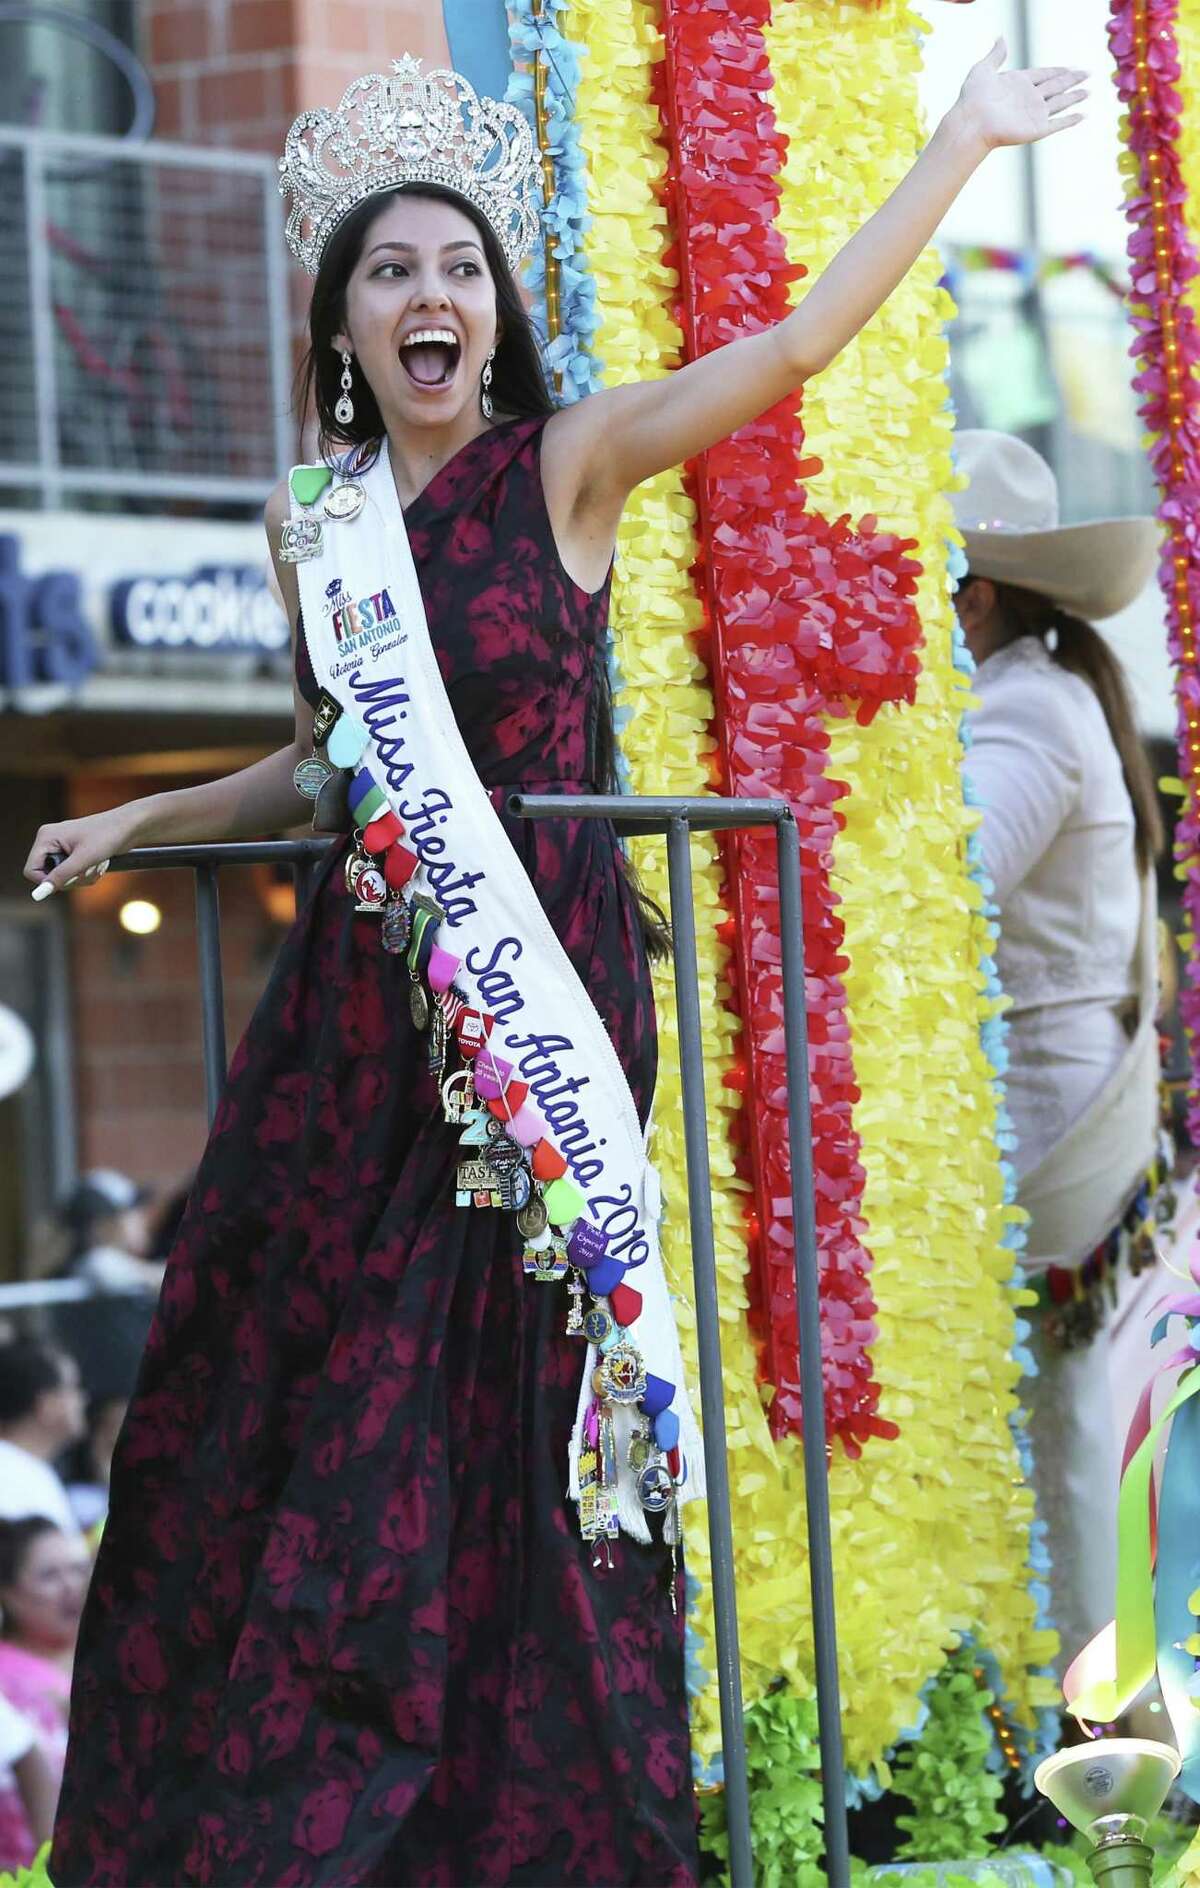 Miss Fiesta responds to cheers during the Fiesta Flambeau Parade on April 27, 2019.